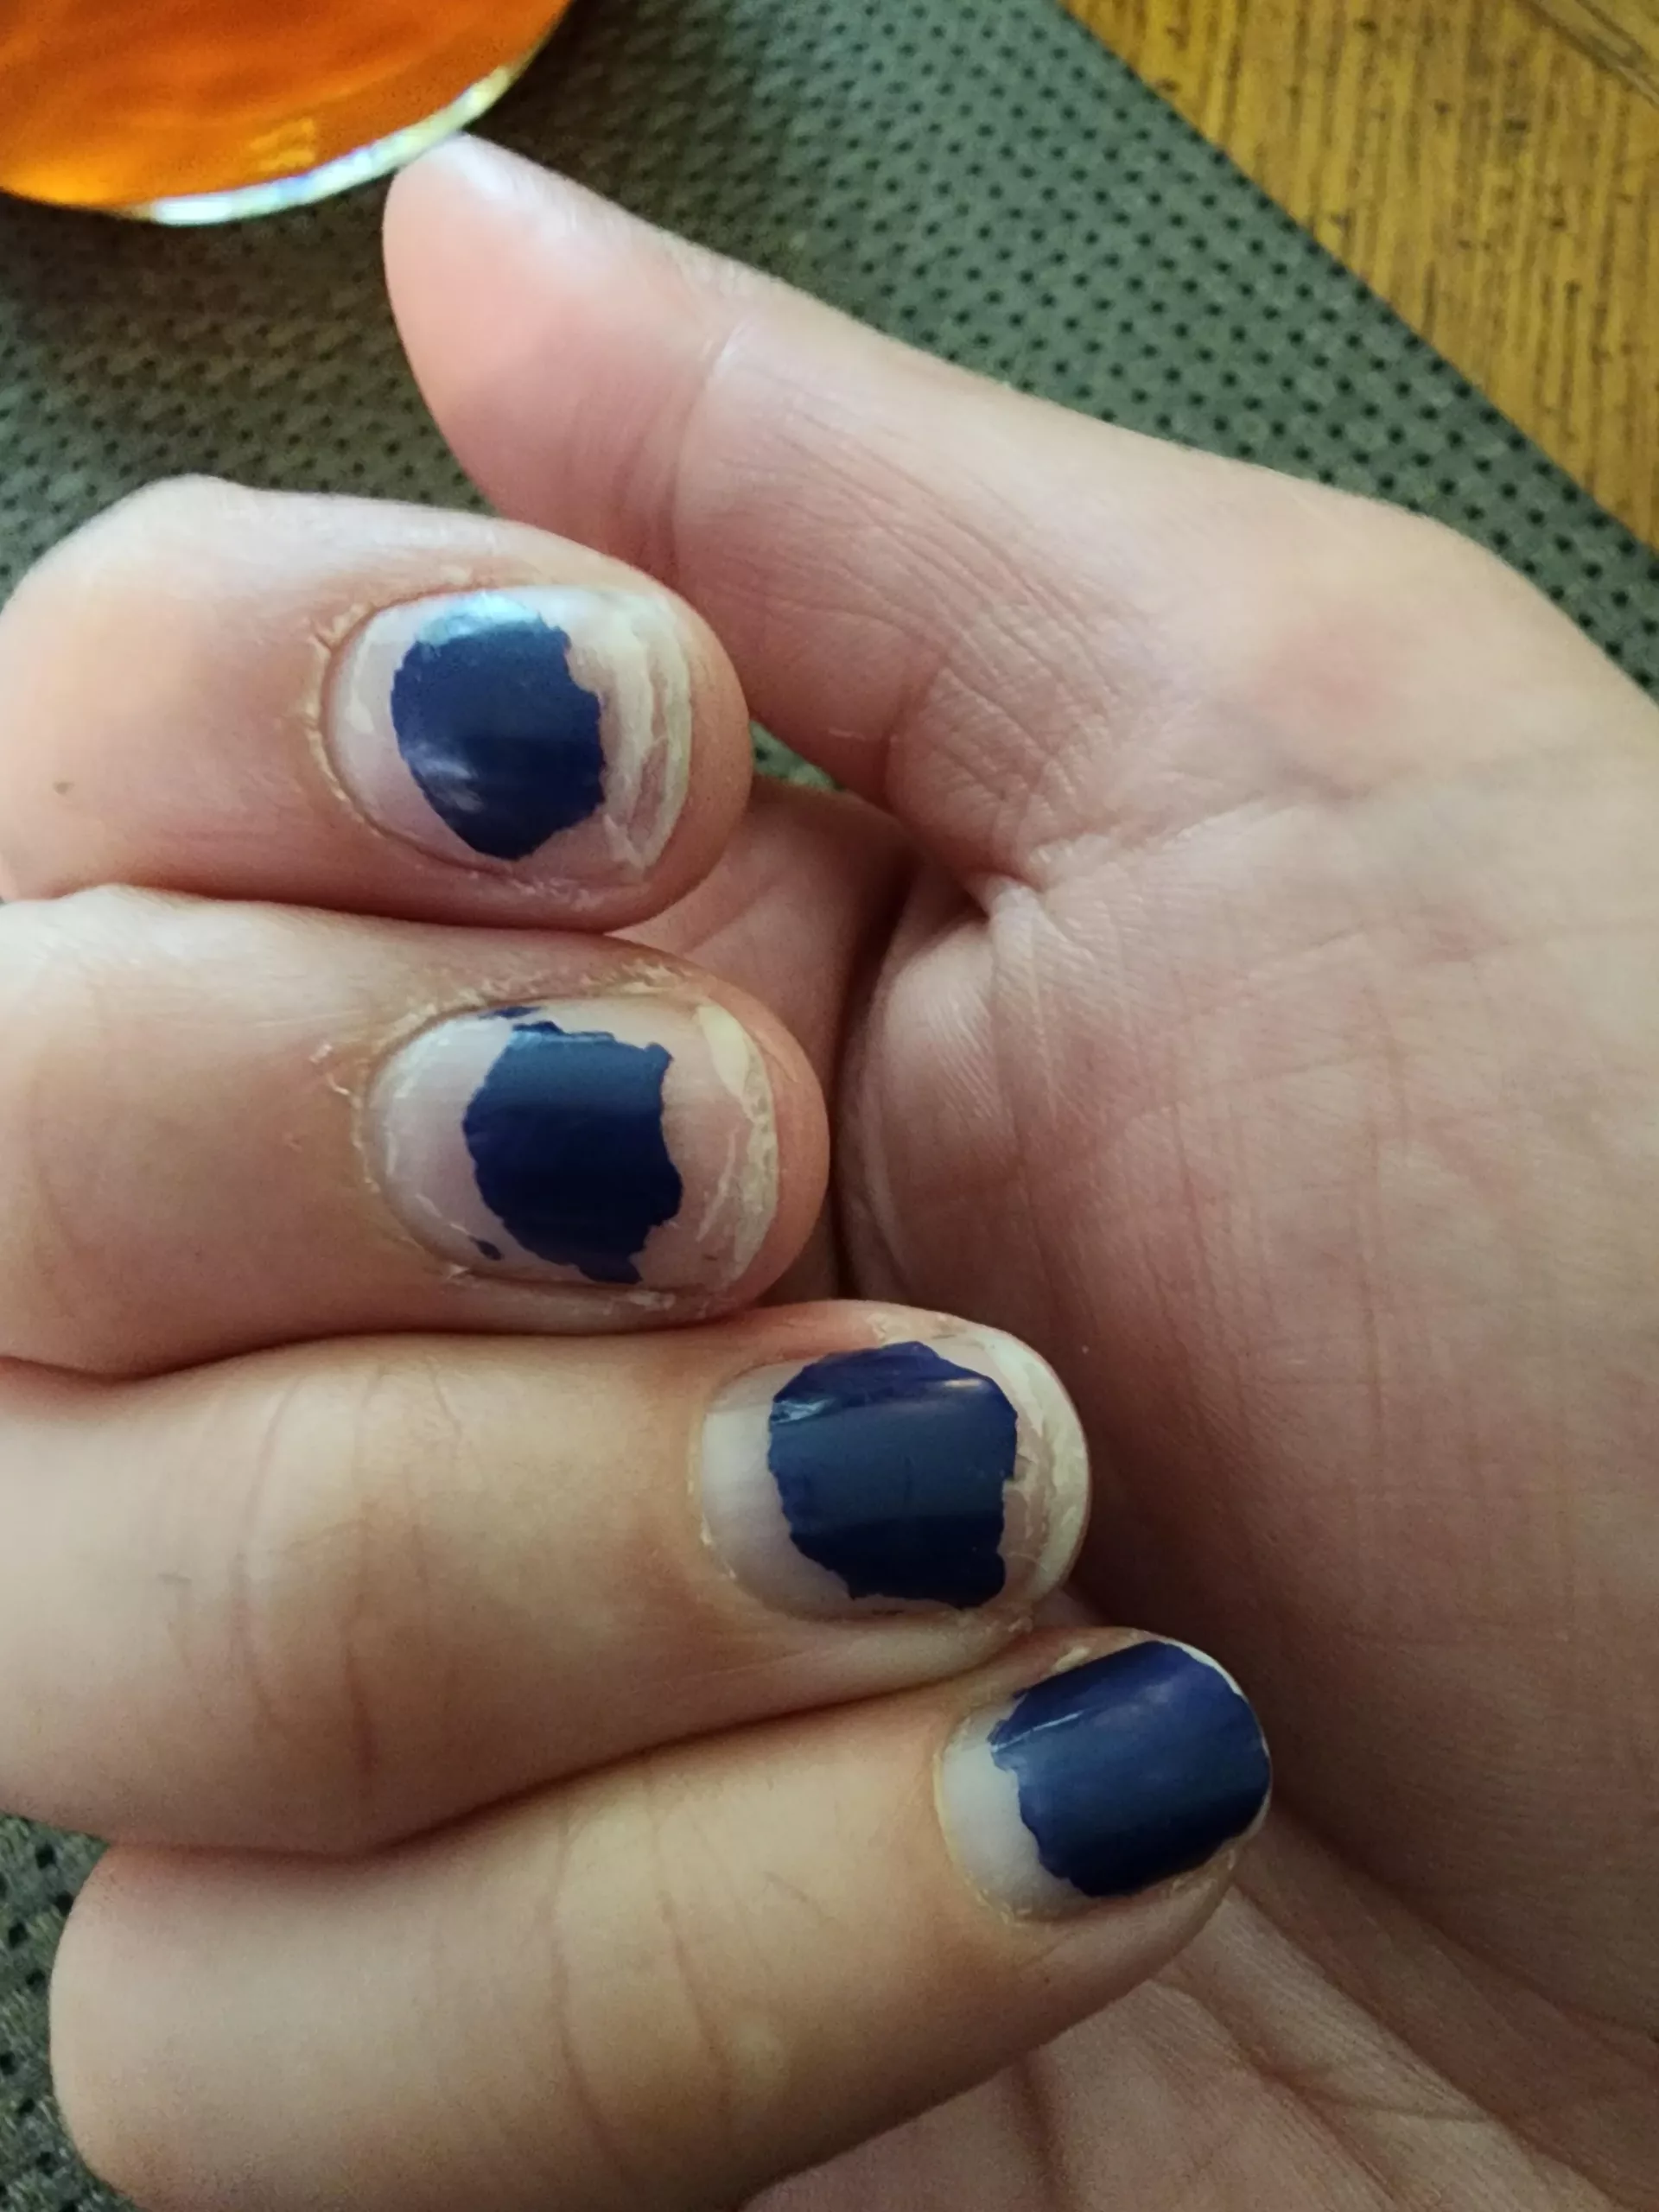 why-do-the-ends-of-my-nails-split-and-peel-v0-sto6spteap0b1